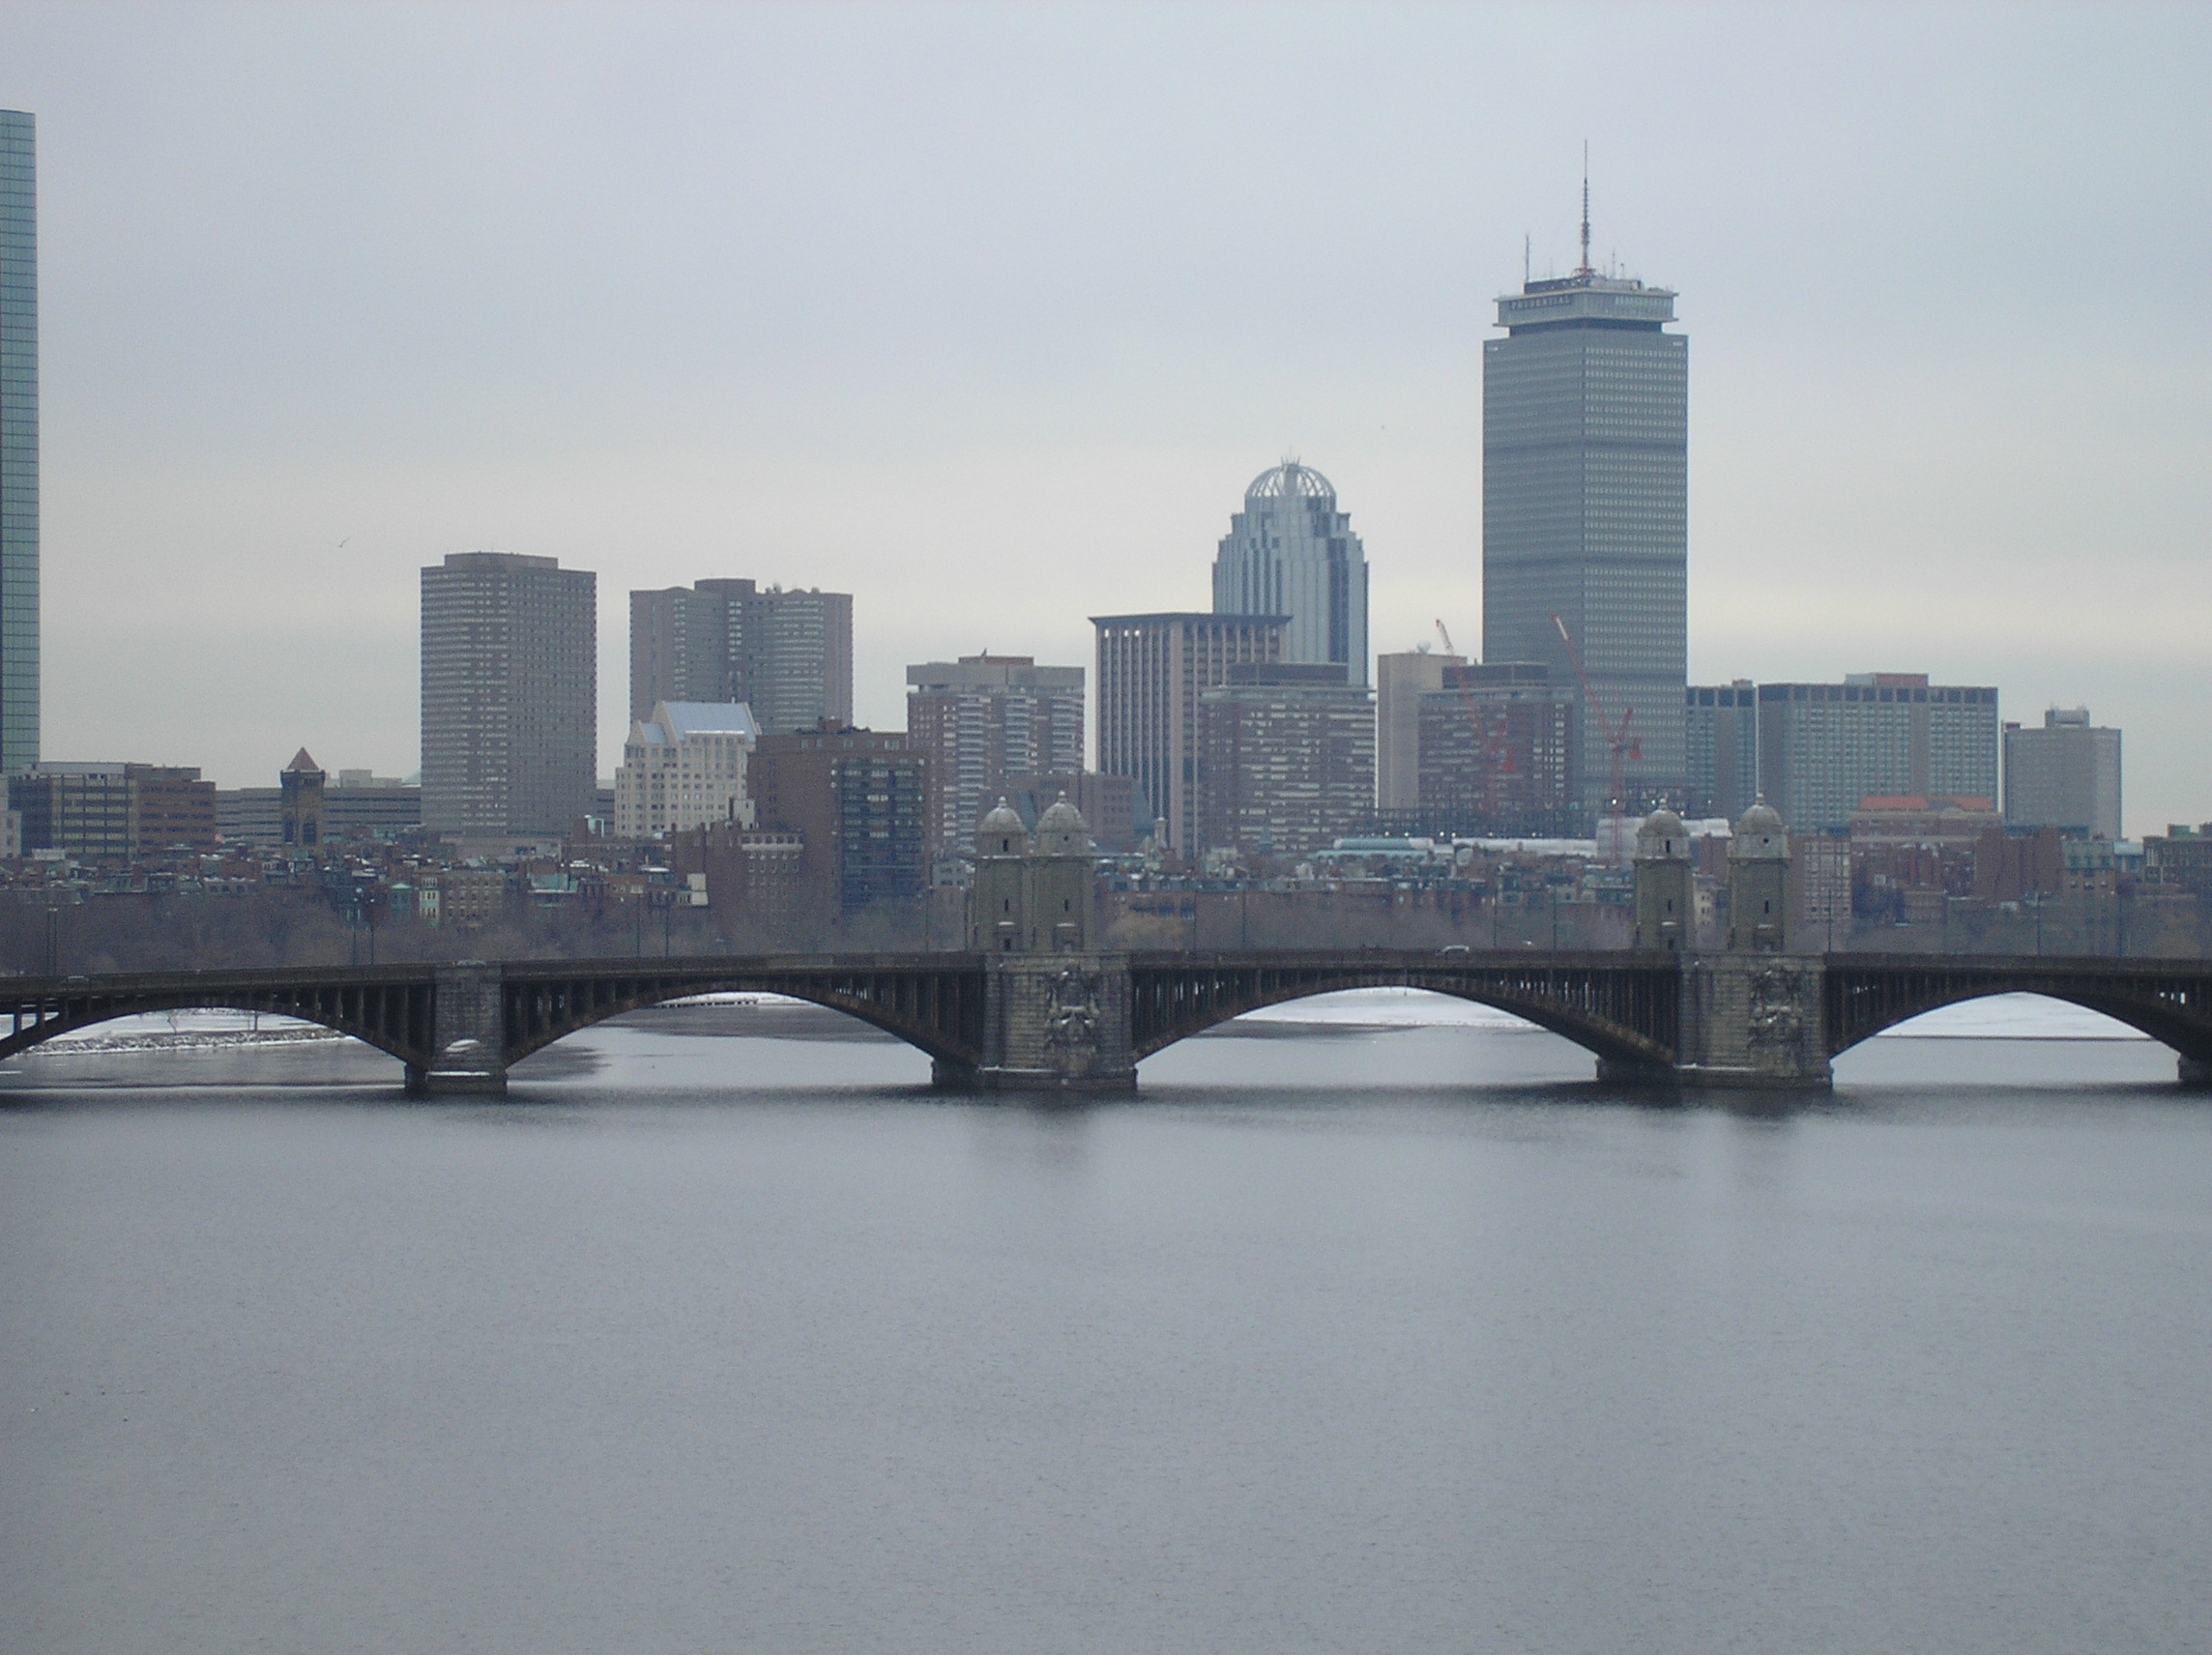 Skyline of Boston (user submitted)